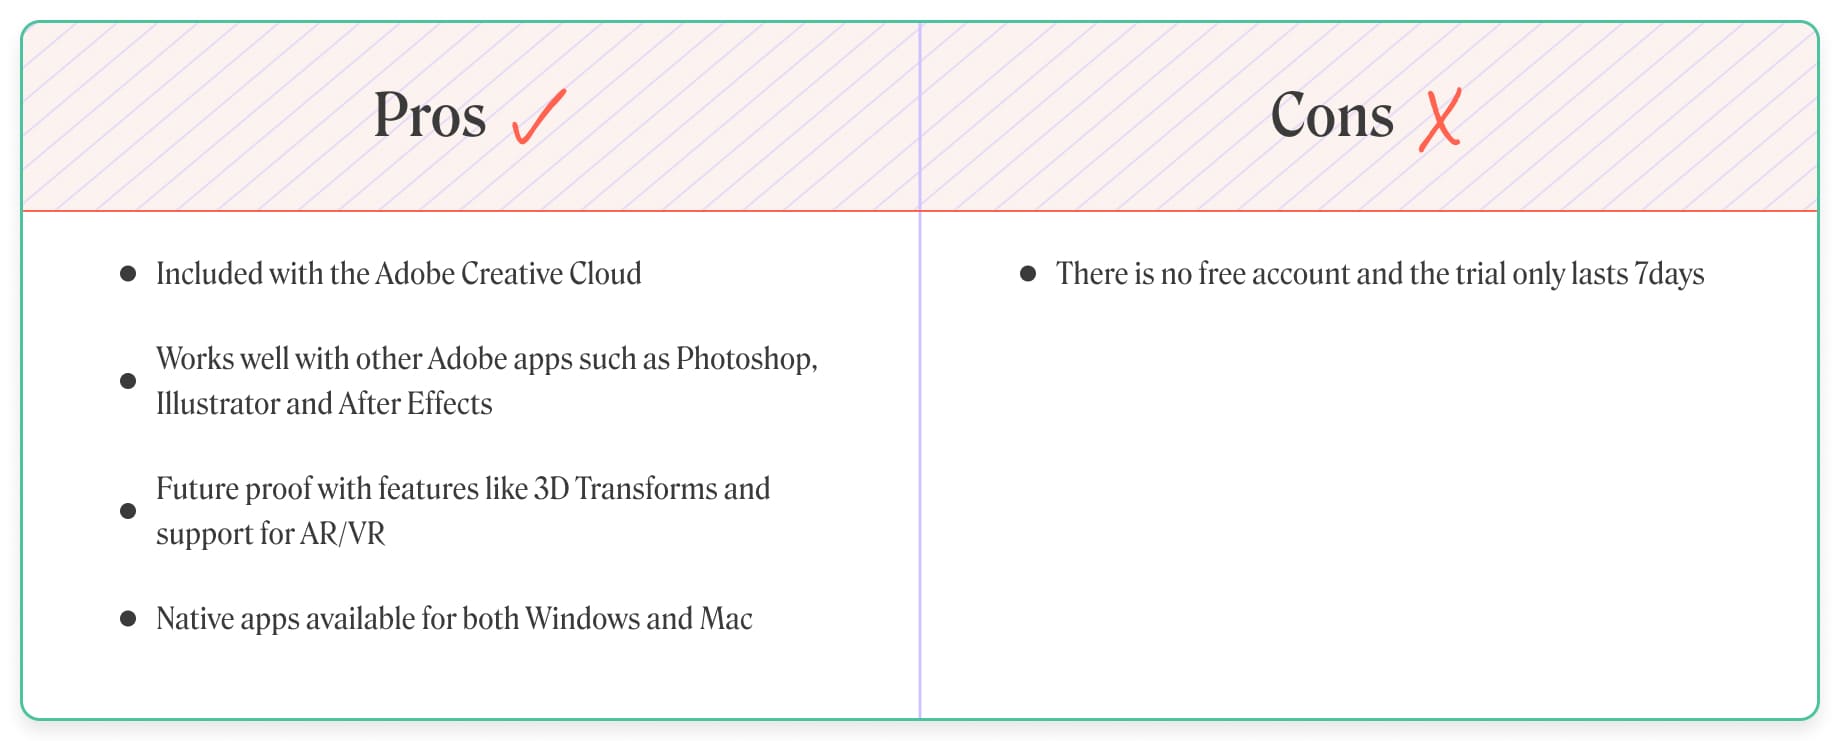 Adobe XD pros and cons